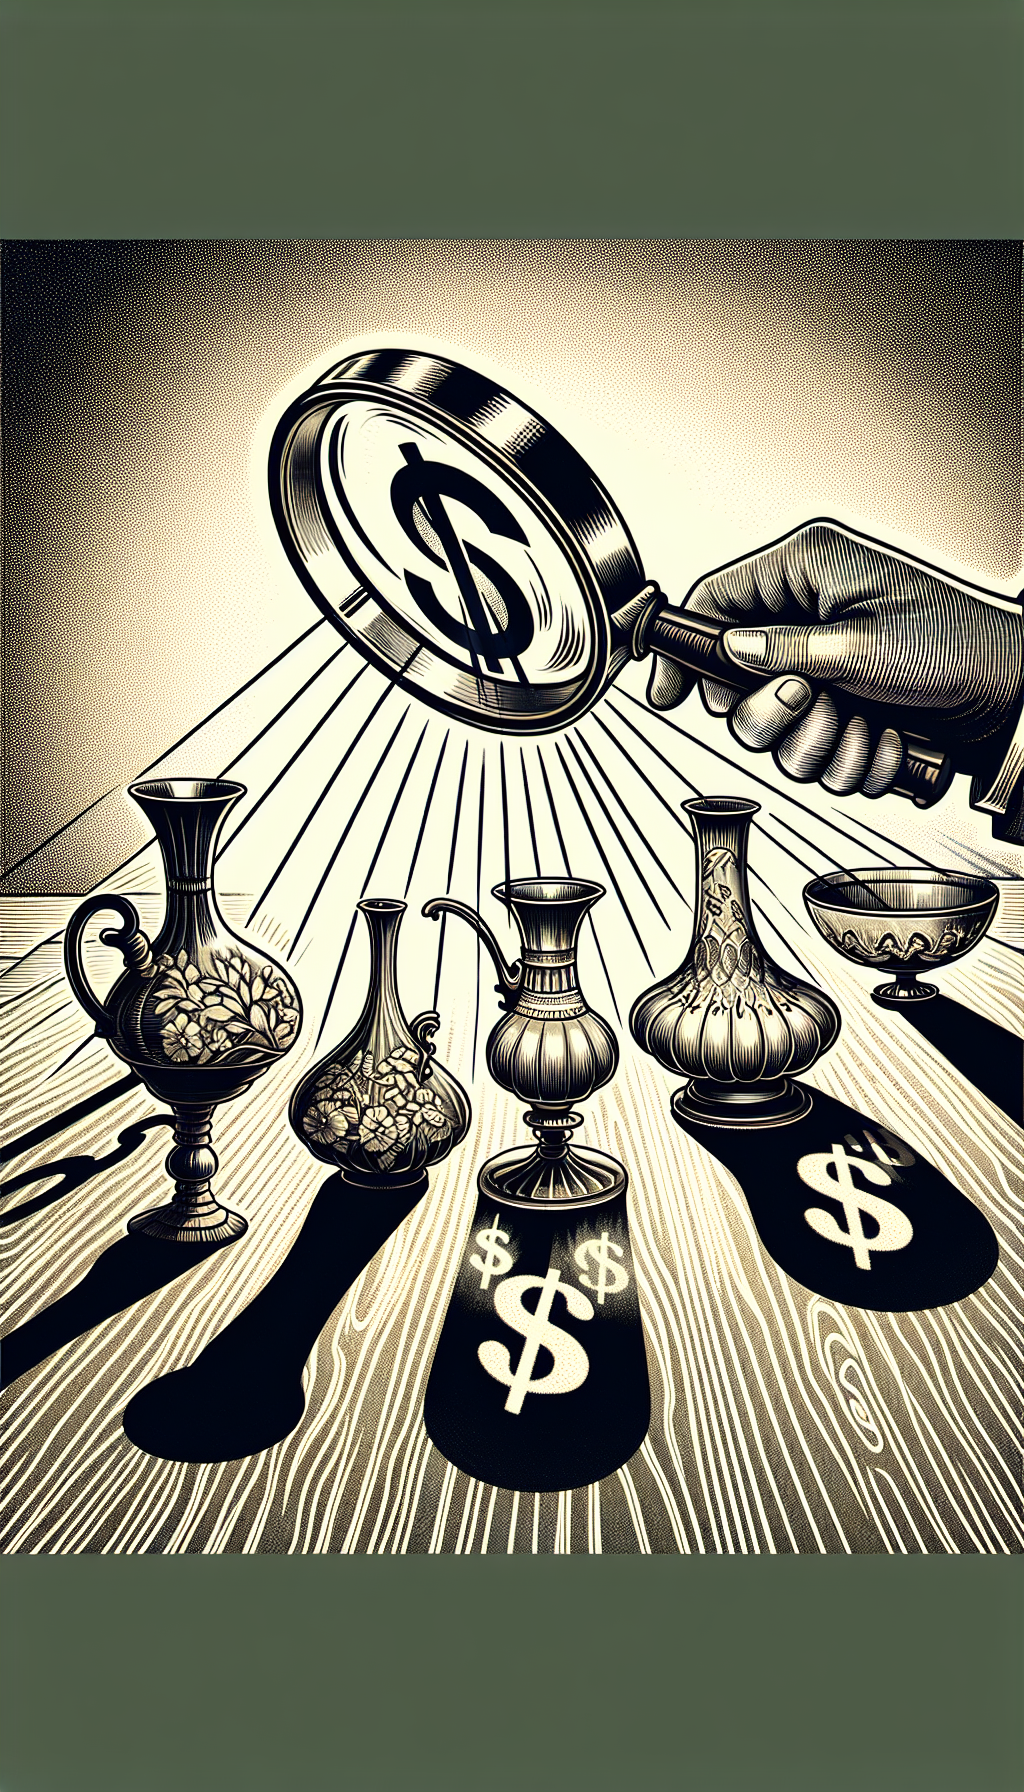 An illustration of a magnifying glass hovering over a collection of antique glassware, with rays of light shining down to highlight unique patterns, maker's marks, and imperfections. The glass pieces cast glowing dollar signs as their shadows, symbolizing their assessed financial value. Styled in a vintage etching technique to complement the antique theme.